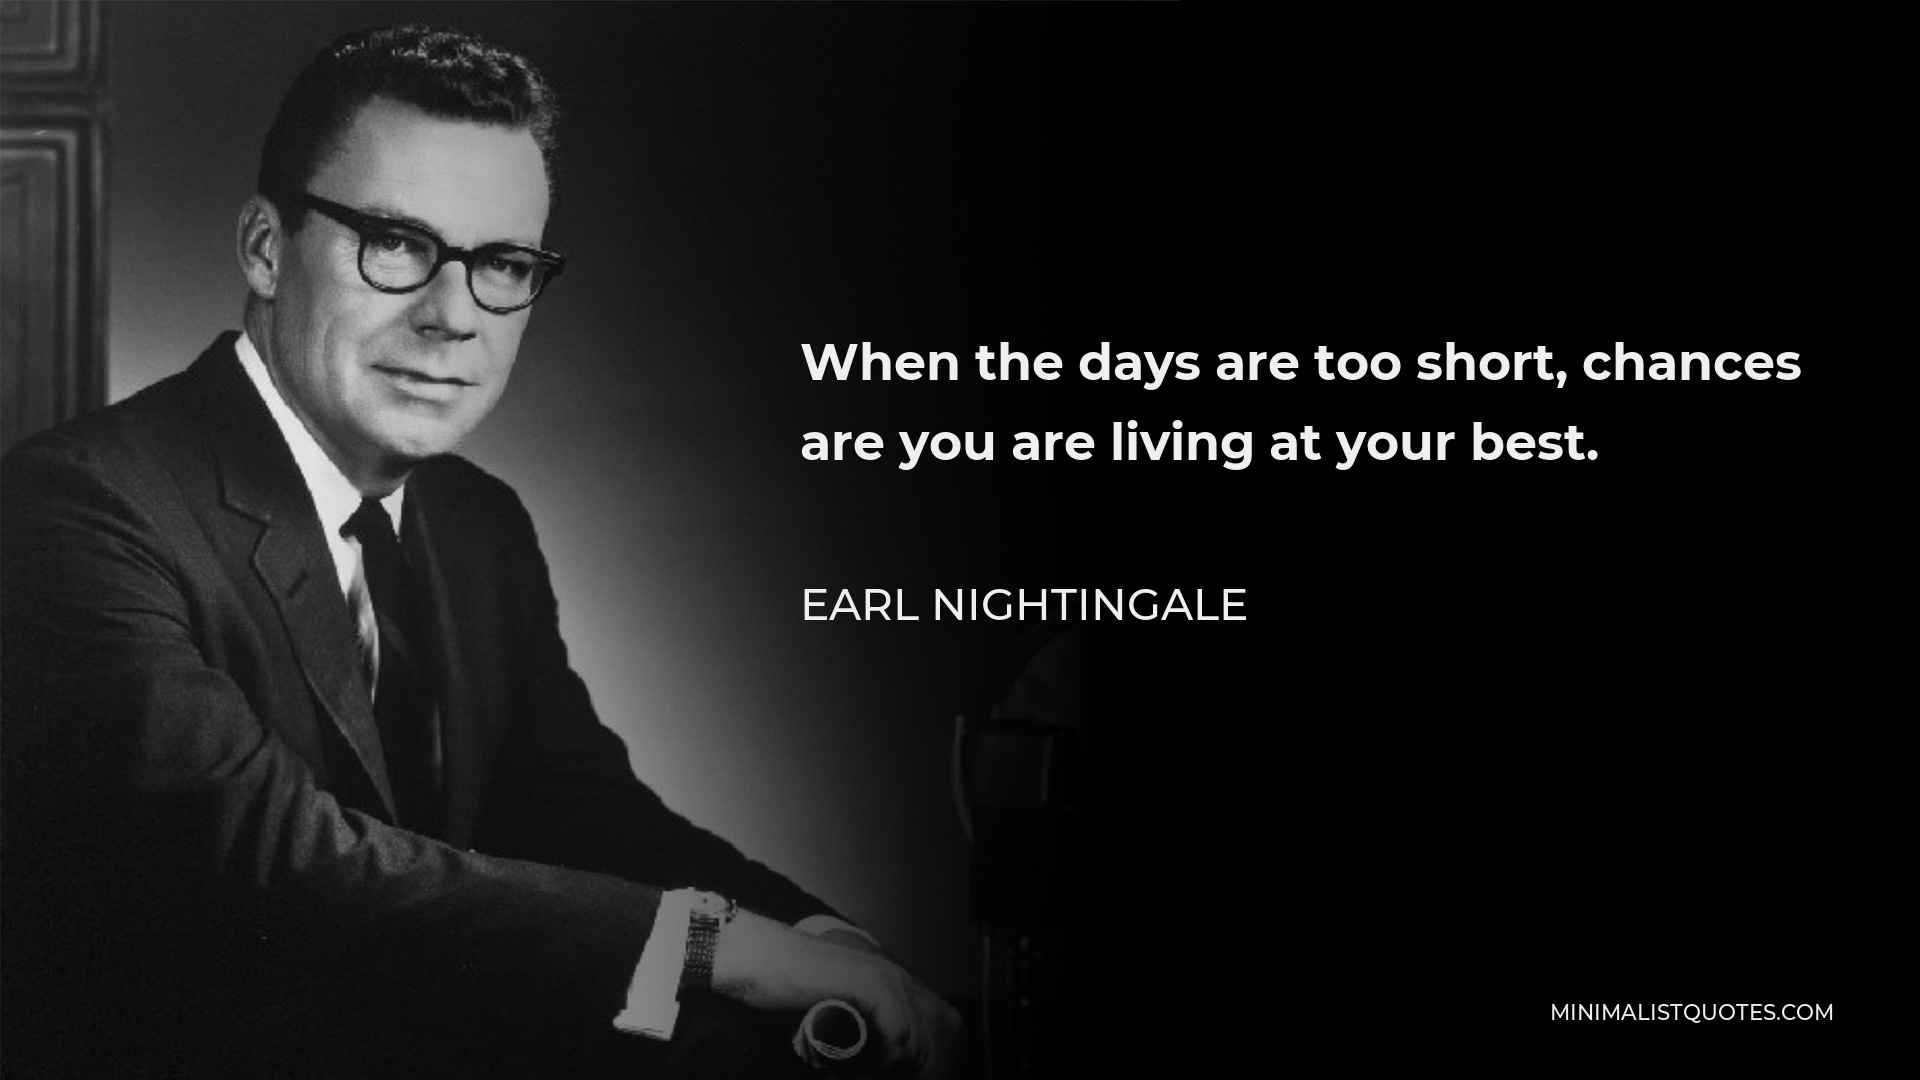 Earl Nightingale Quote - When the days are too short, chances are you are living at your best.